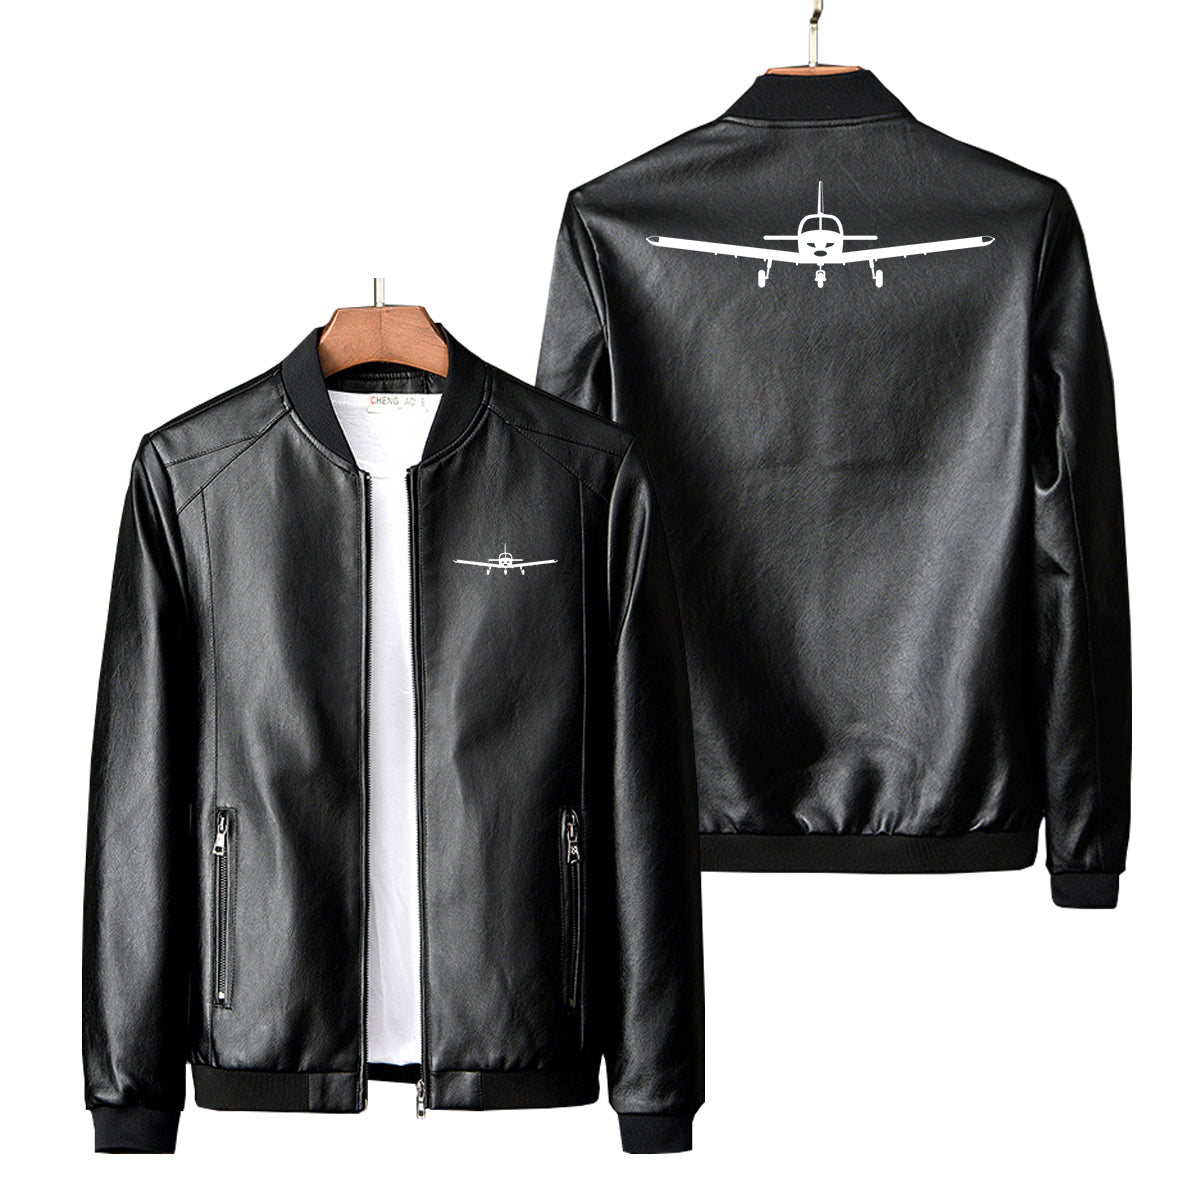 Piper PA28 Silhouette Plane Designed PU Leather Jackets